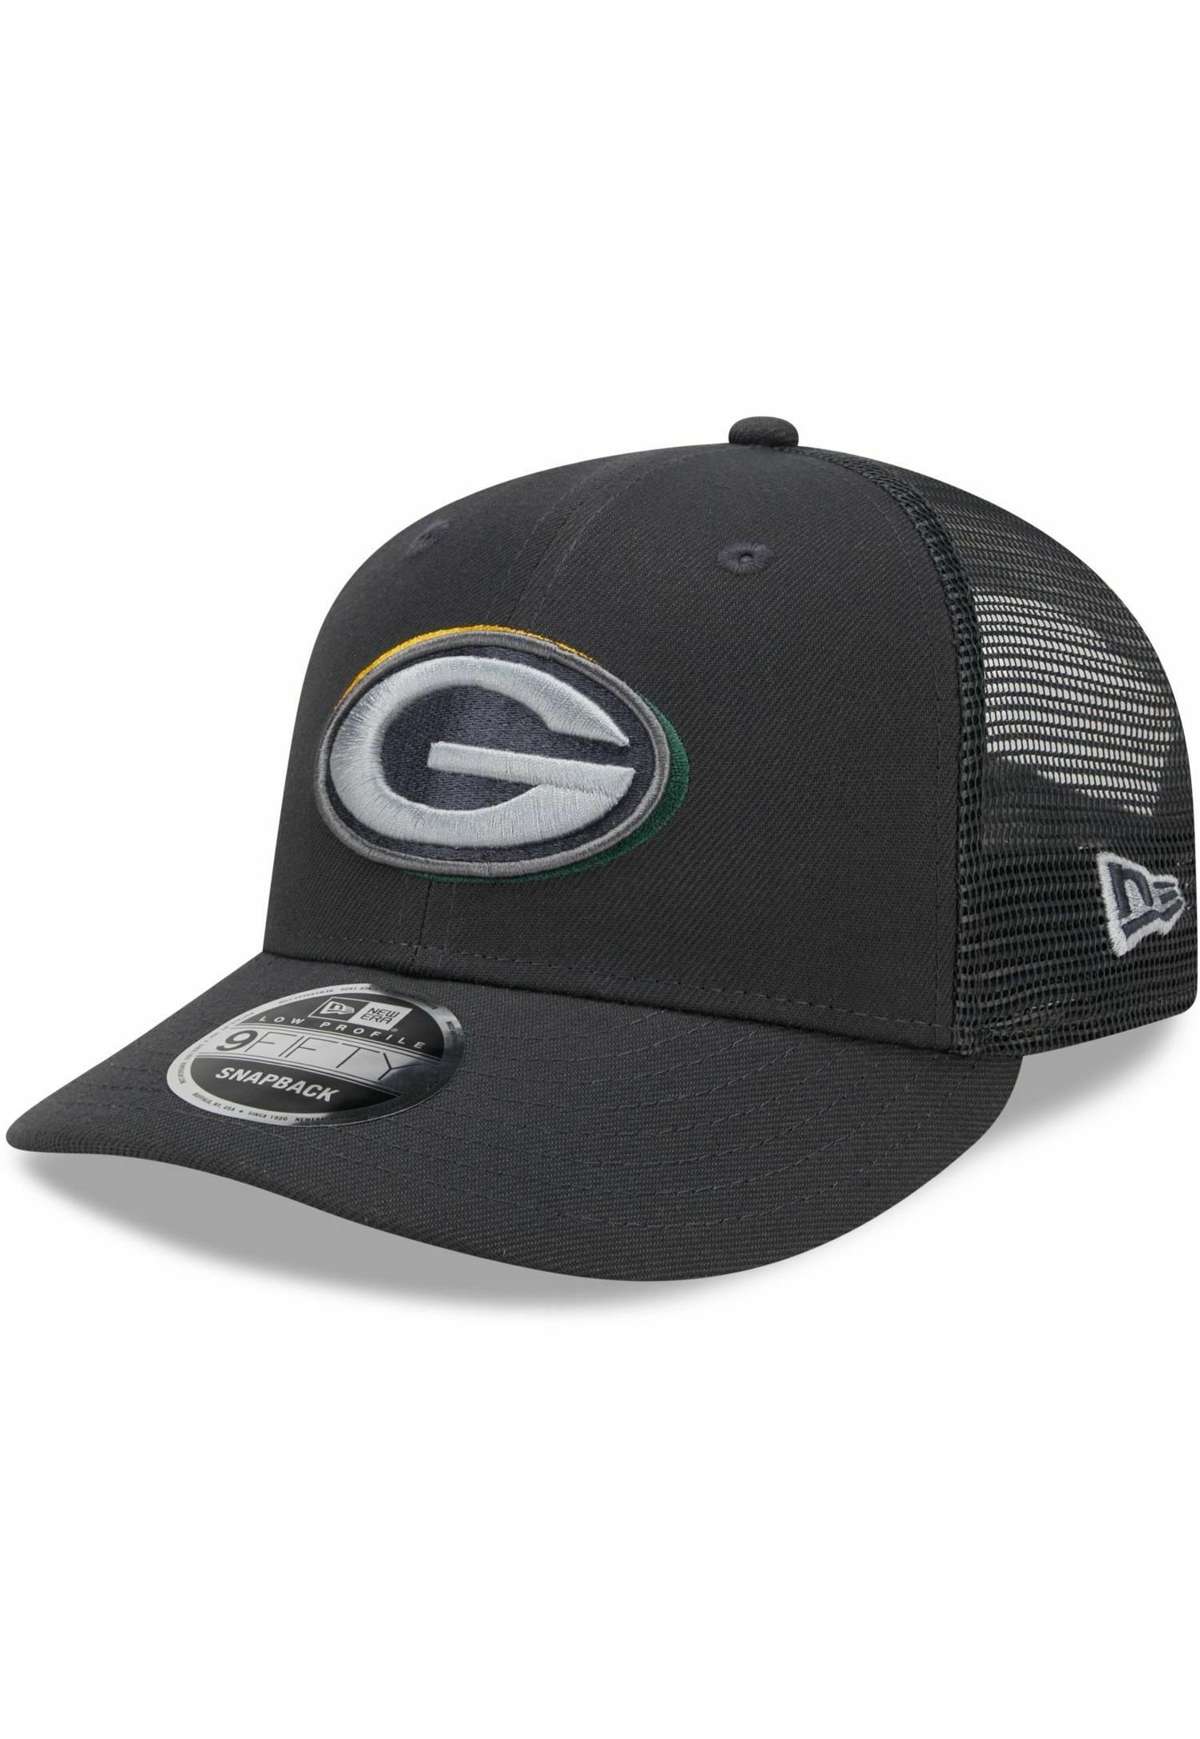 Кепка 9FIFTY NFL DRAFT GREEN BAY PACKERS